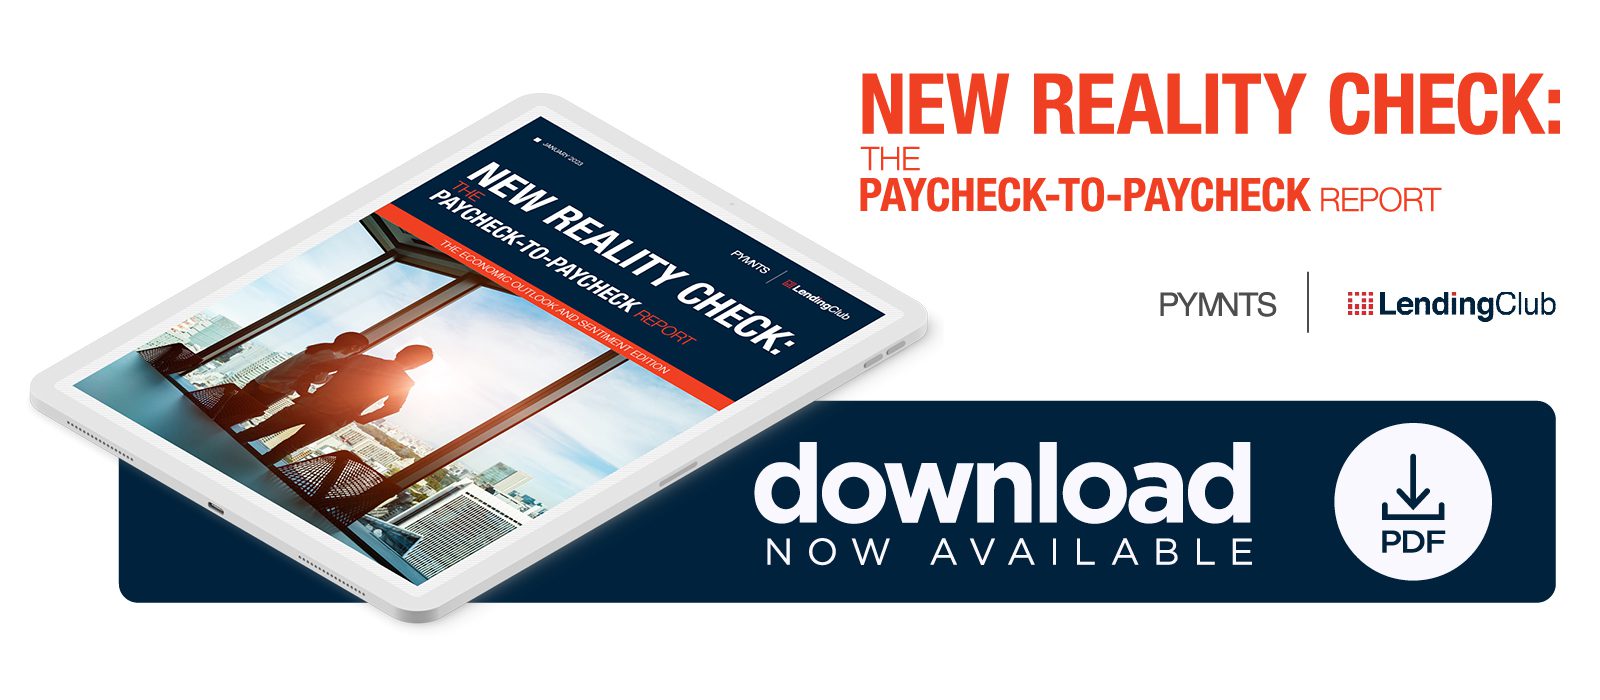 LendingClub - New Reality Check: The Paycheck-To-Paycheck Report: The Economic Outlook and Sentiment Edition - January 2023 - Learn how inflationary pressures and economic uncertainty impact consumers living paycheck to paycheck and their 2023 financial expectations